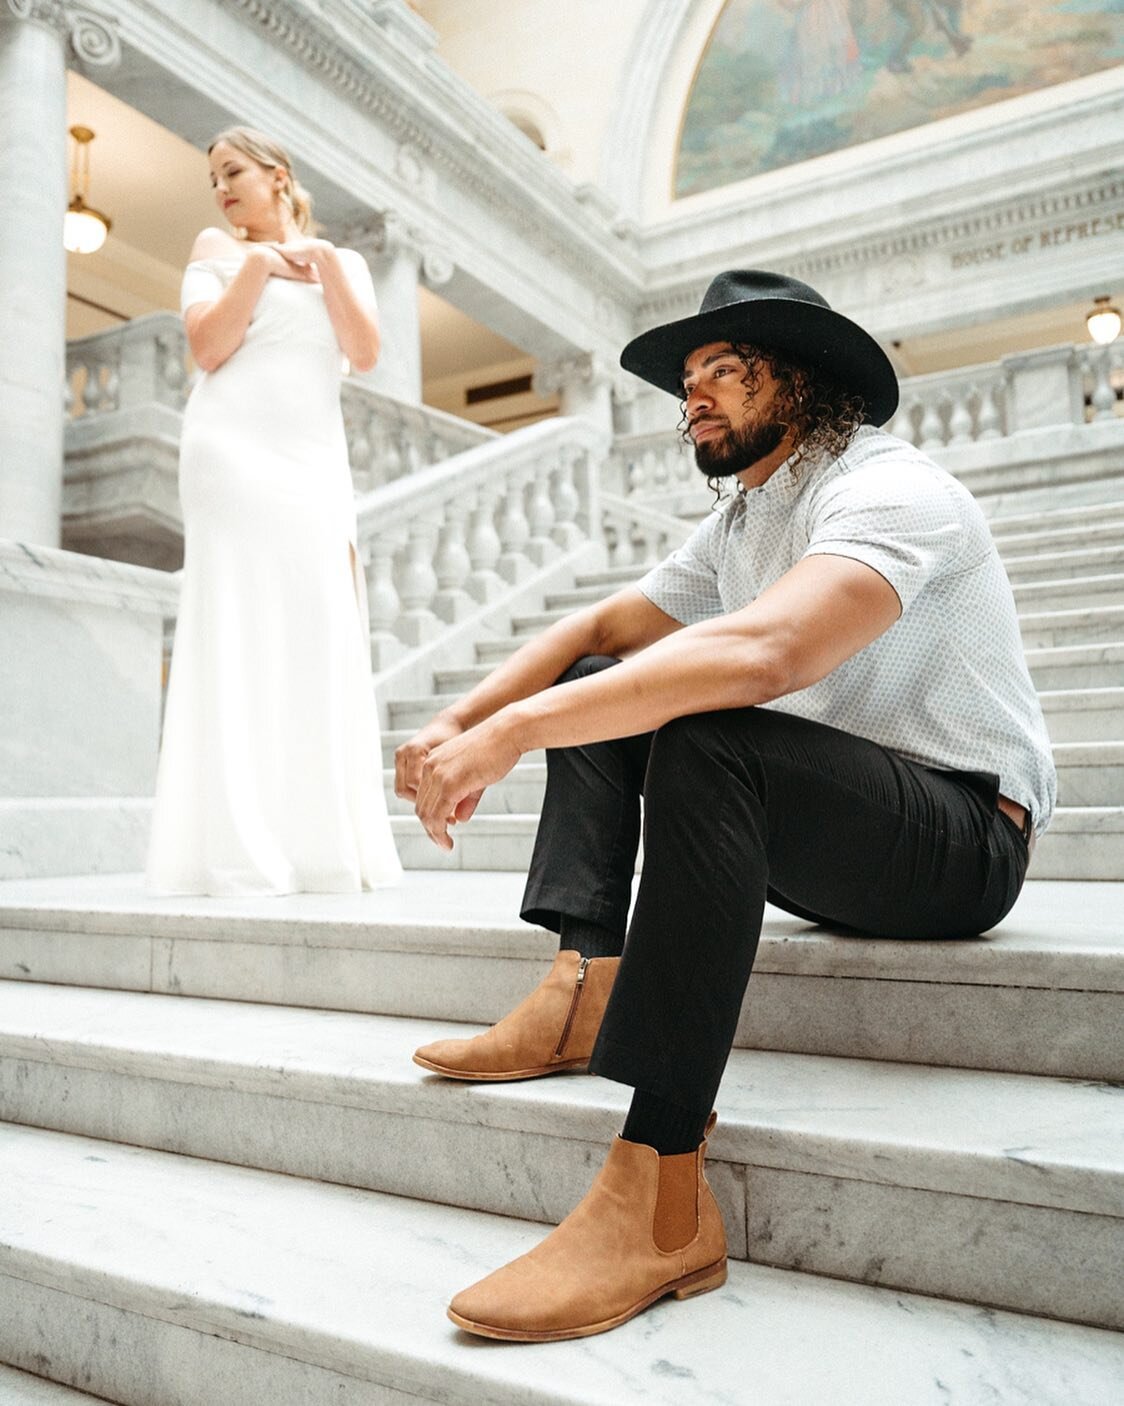 Mikaela &amp; Sione inside the stunning Utah State Capitol building in Salt Lake City. 😮&zwj;💨